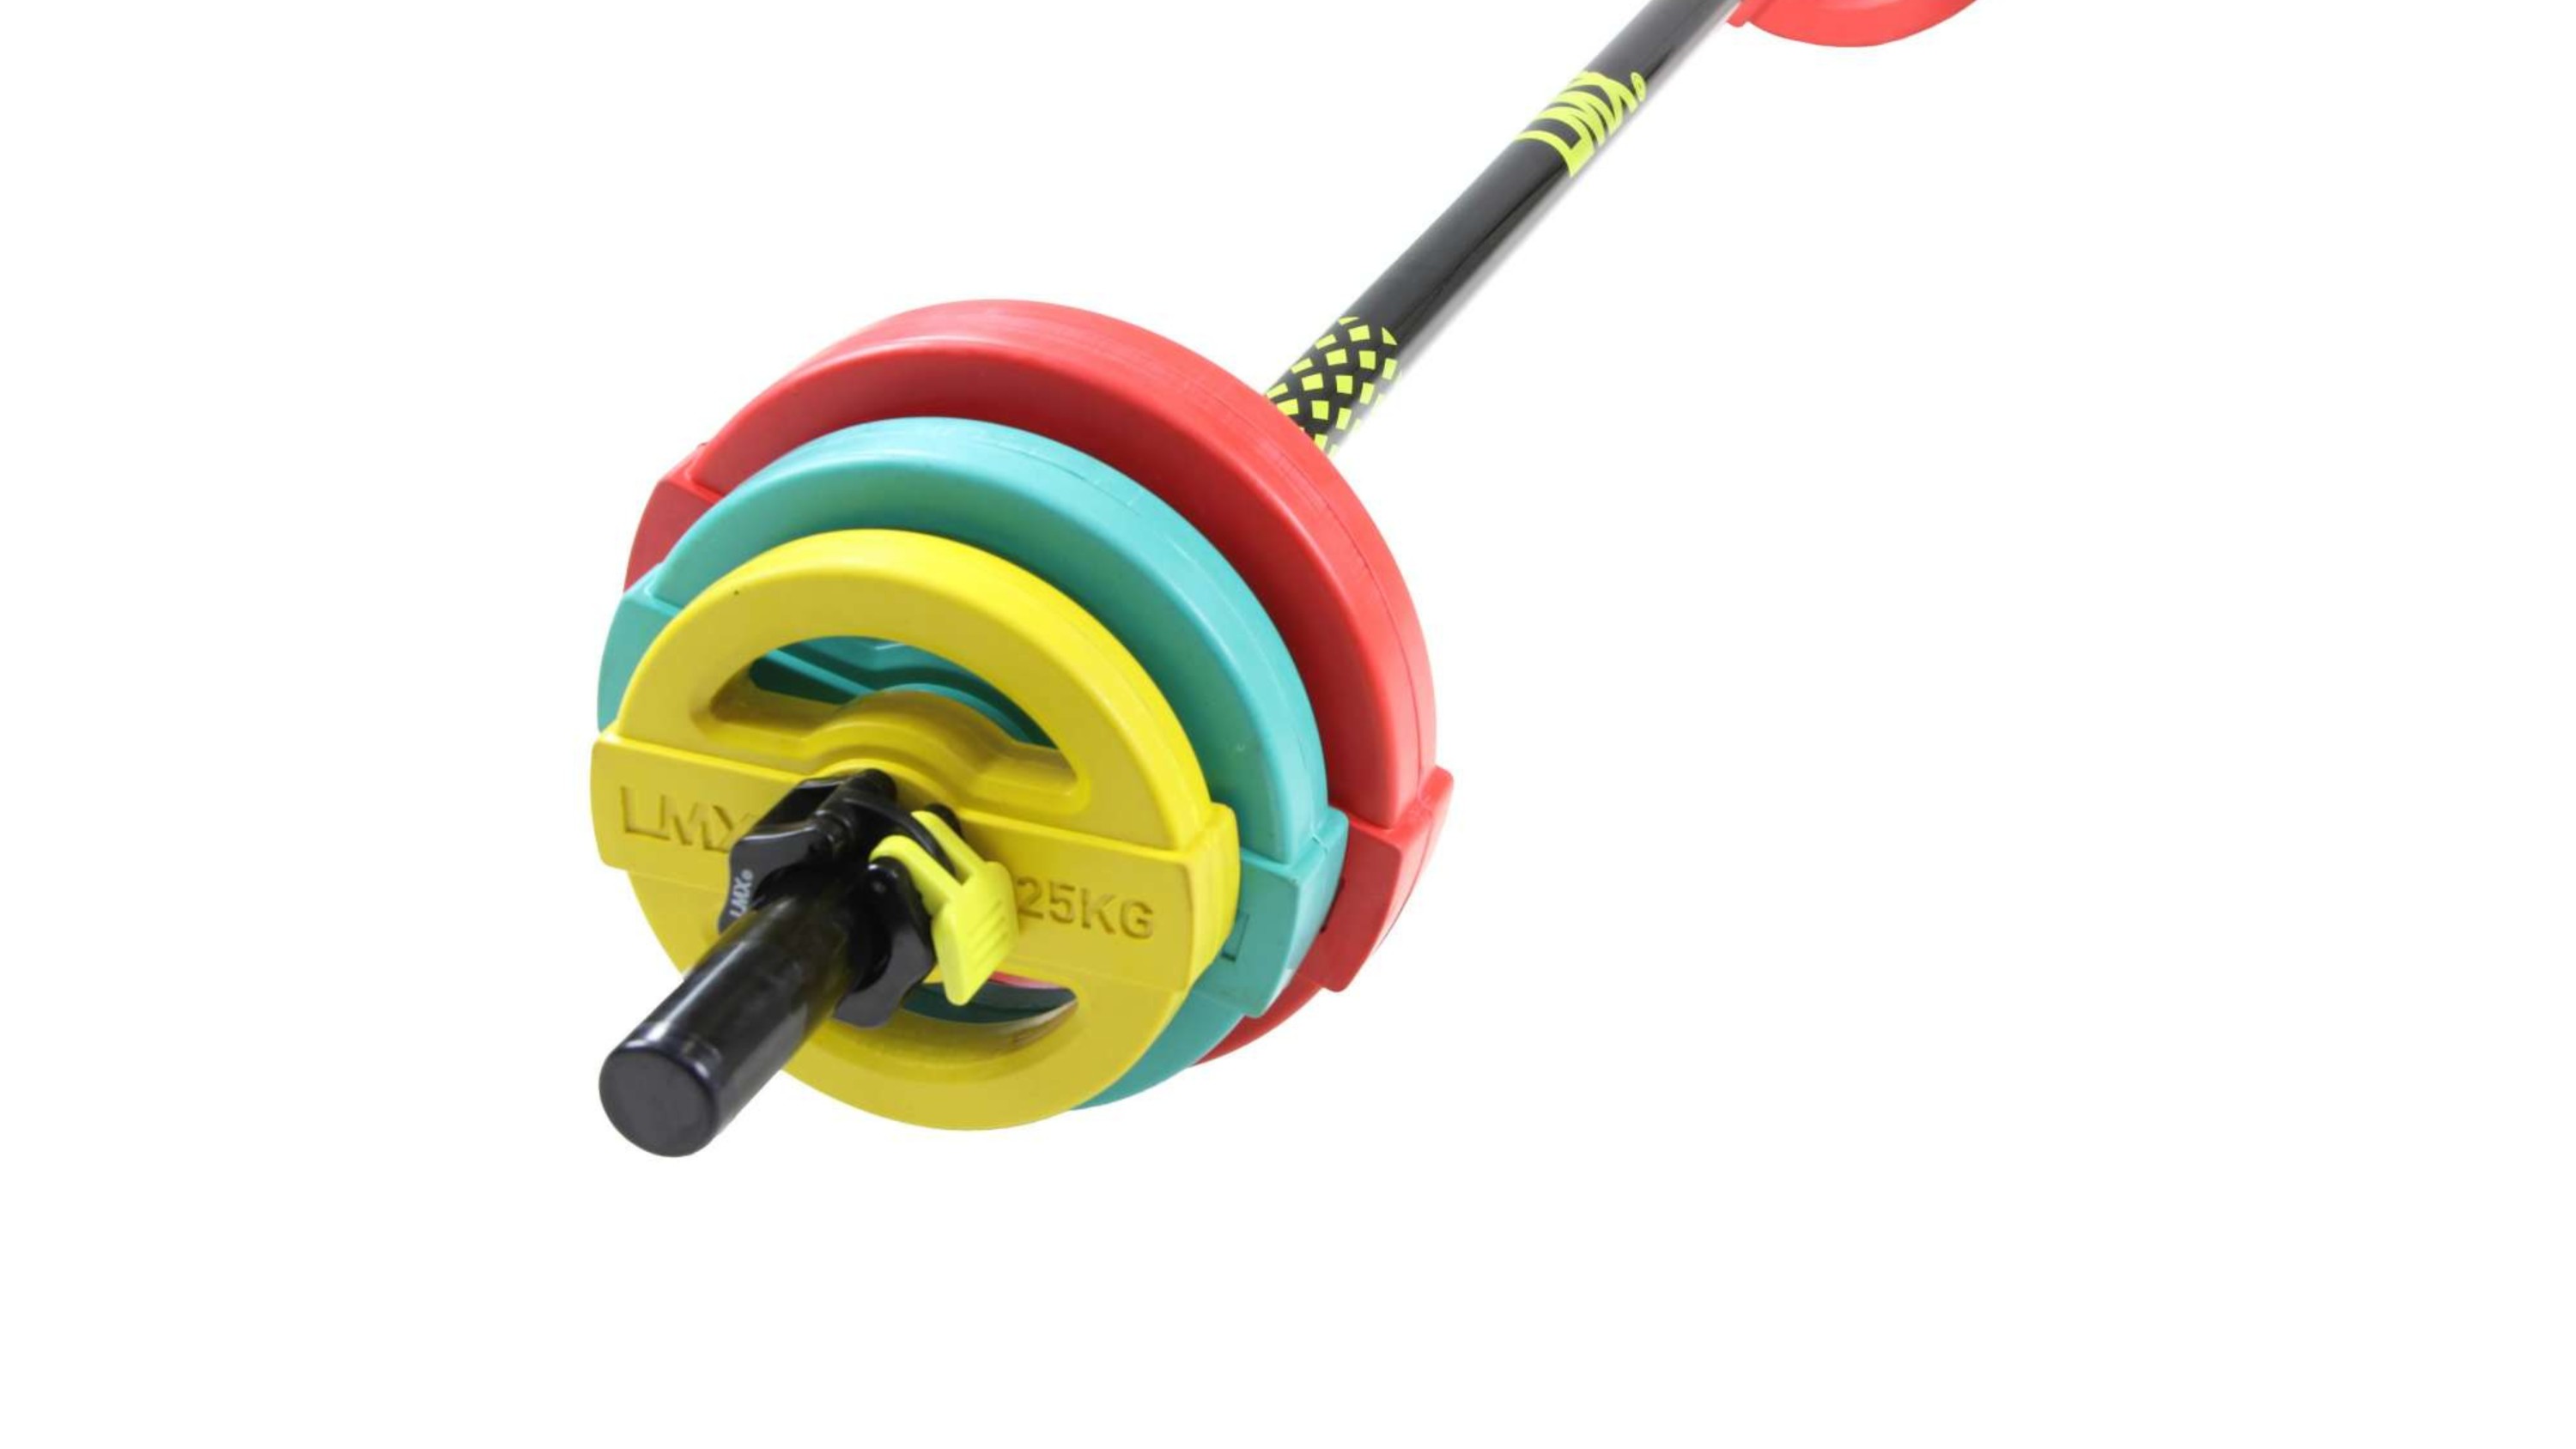 With this barbell you improve strength